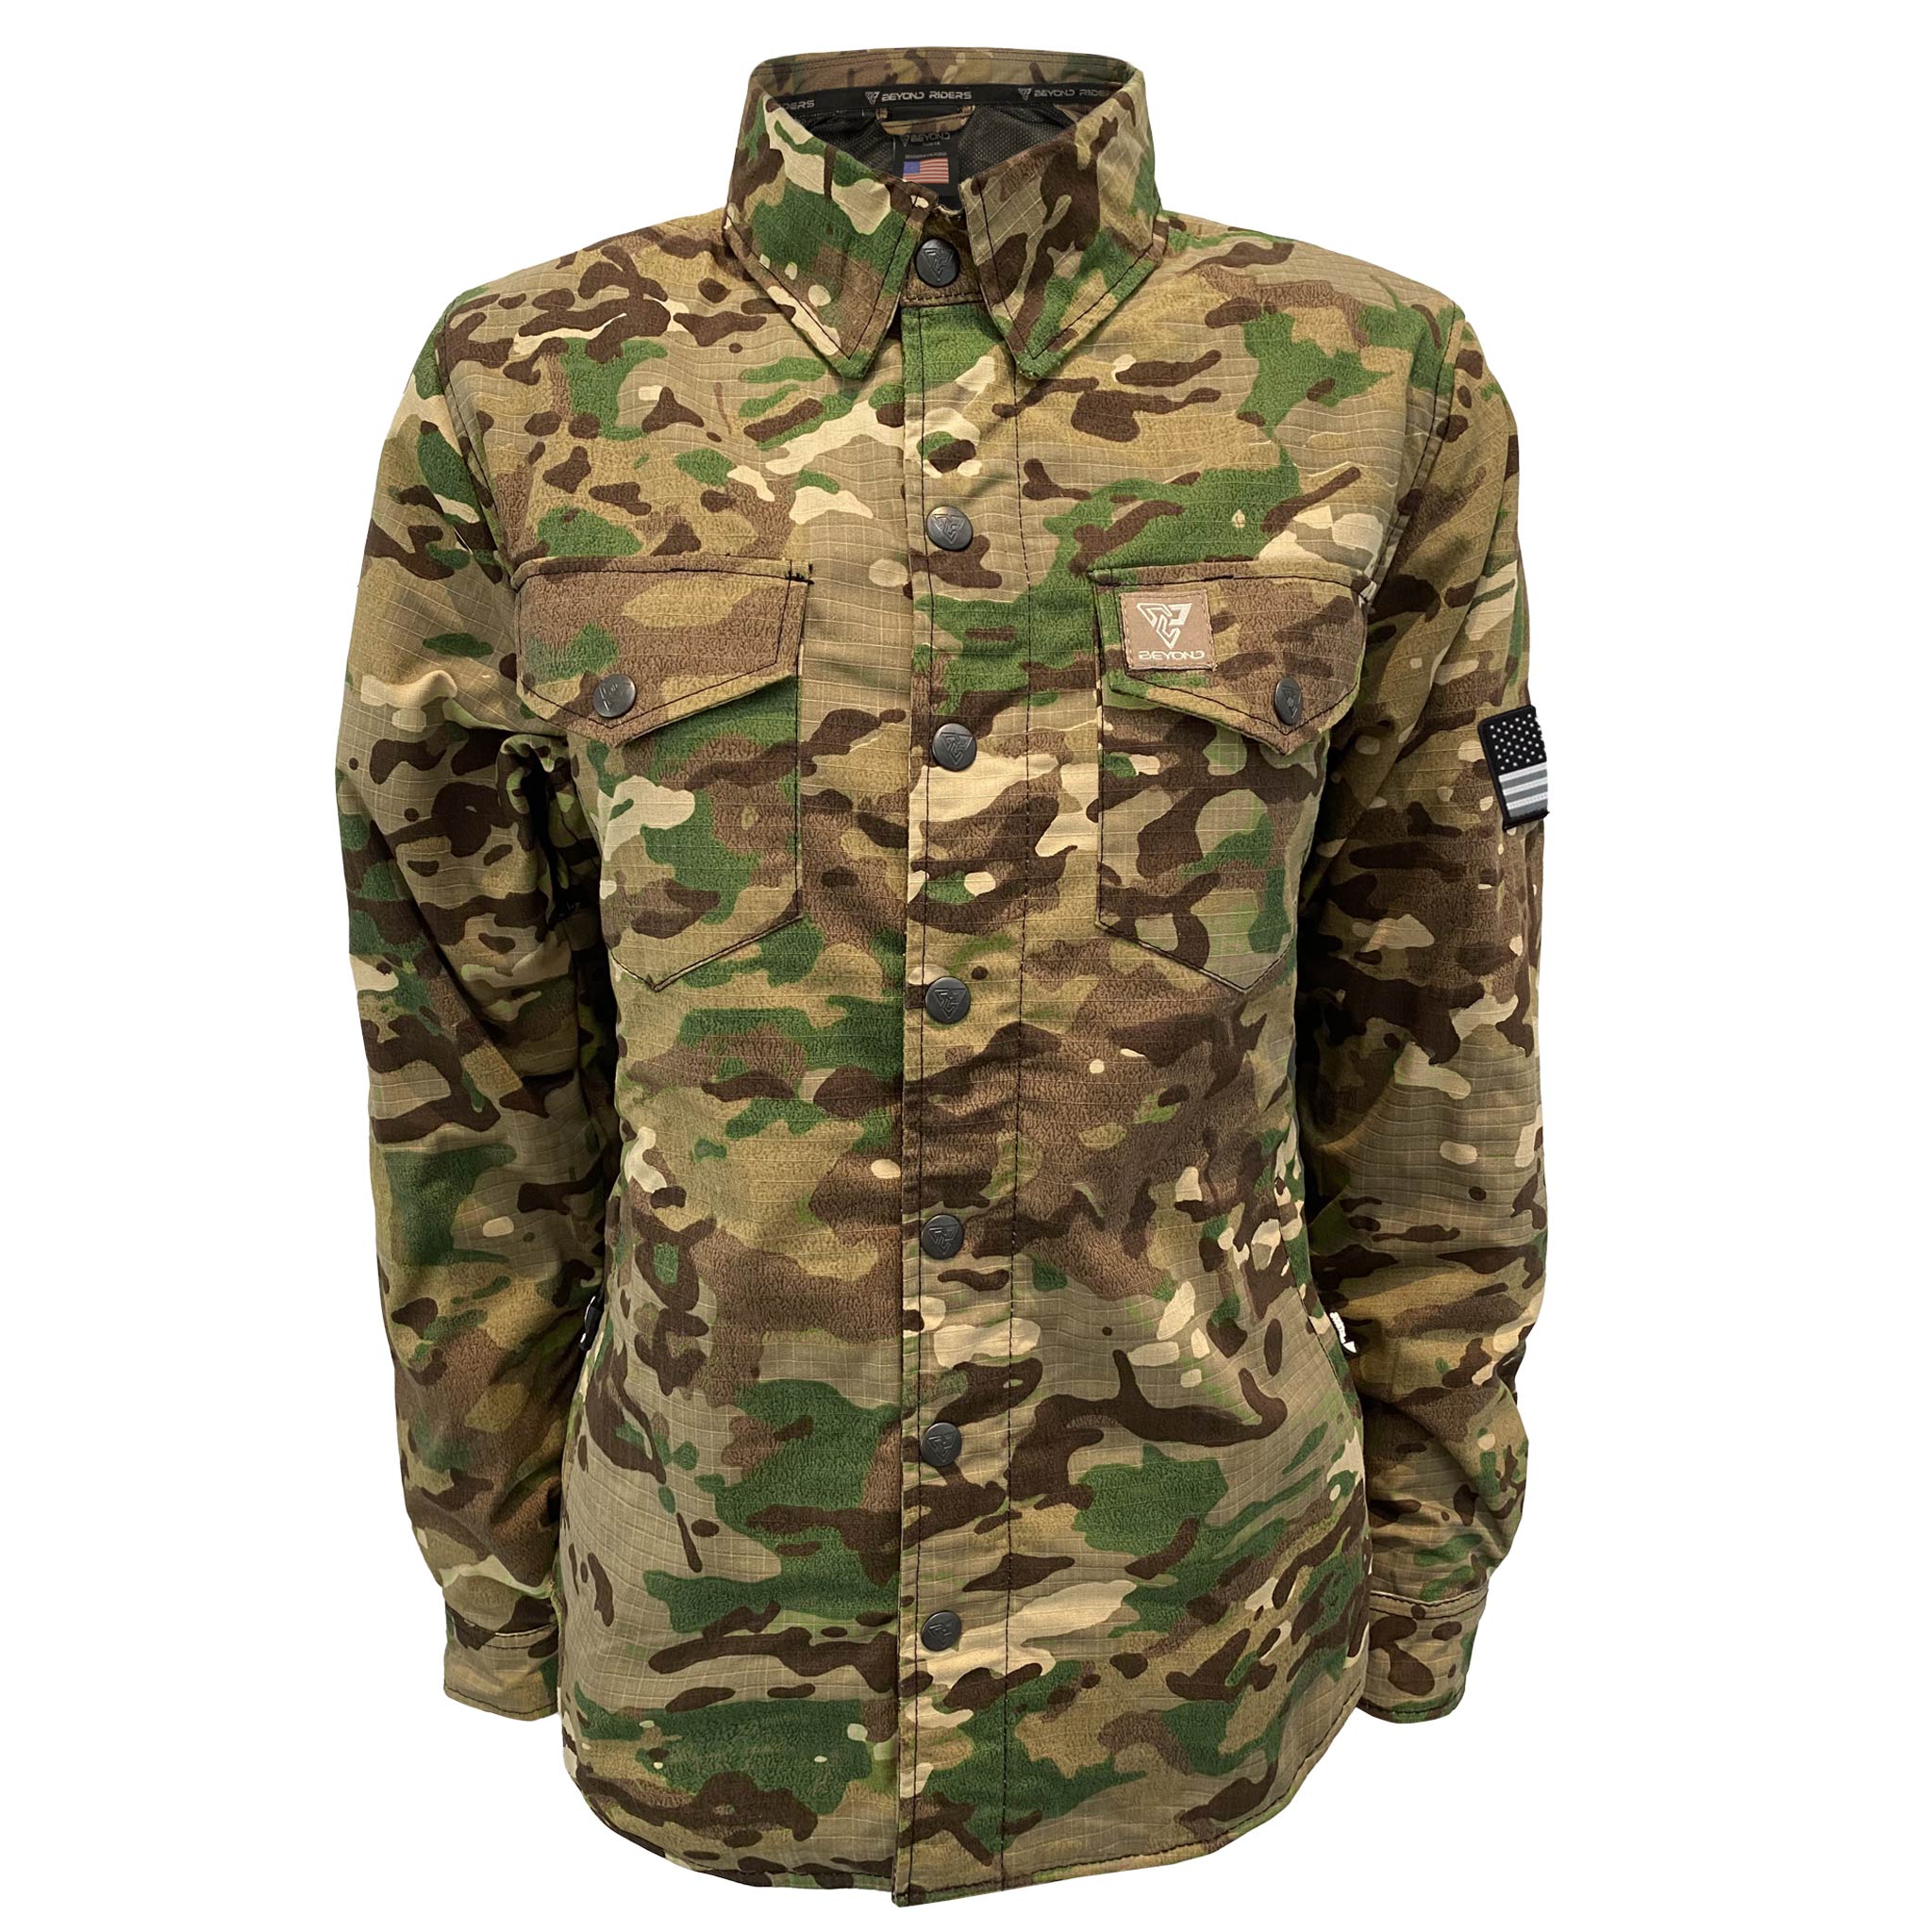 Protective Camouflage Shirt for Women 